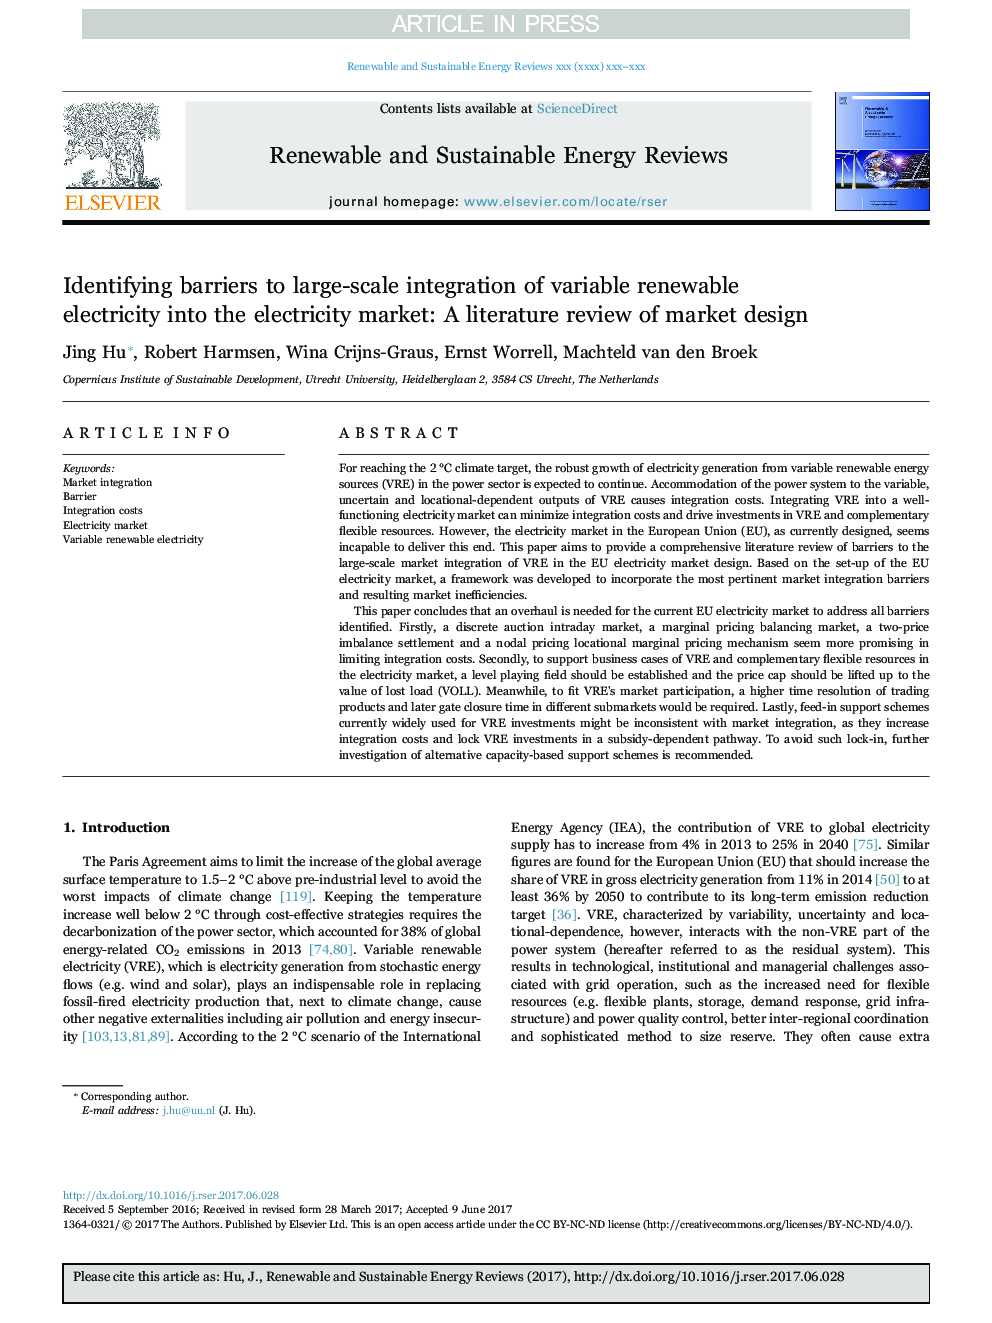 Identifying barriers to large-scale integration of variable renewable electricity into the electricity market: A literature review of market design